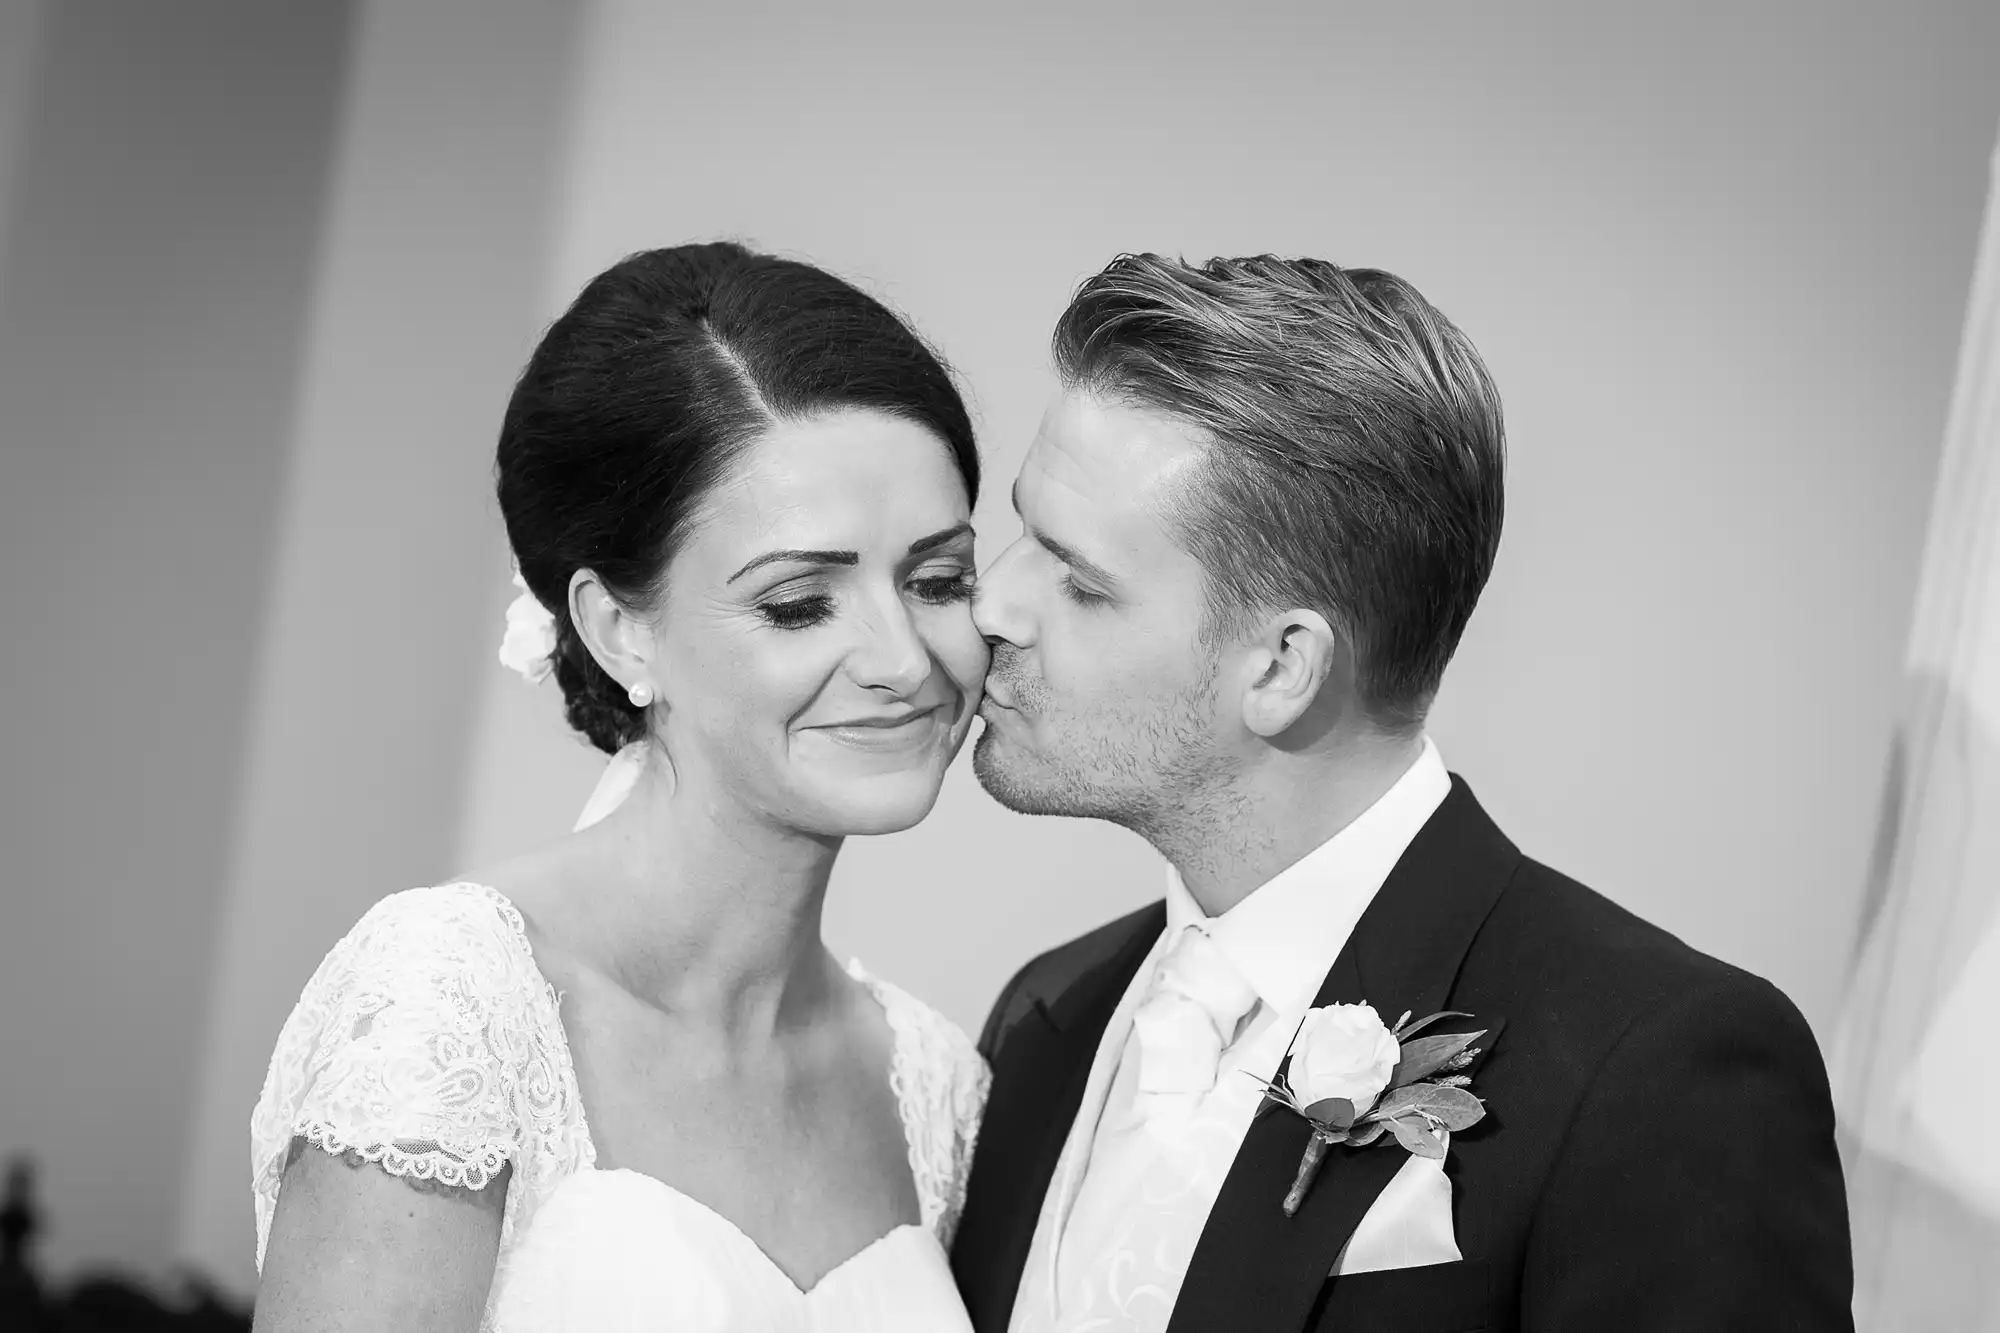 Groom kissing bride on the cheek in a black and white wedding photo, both smiling gently, bride in lace dress.